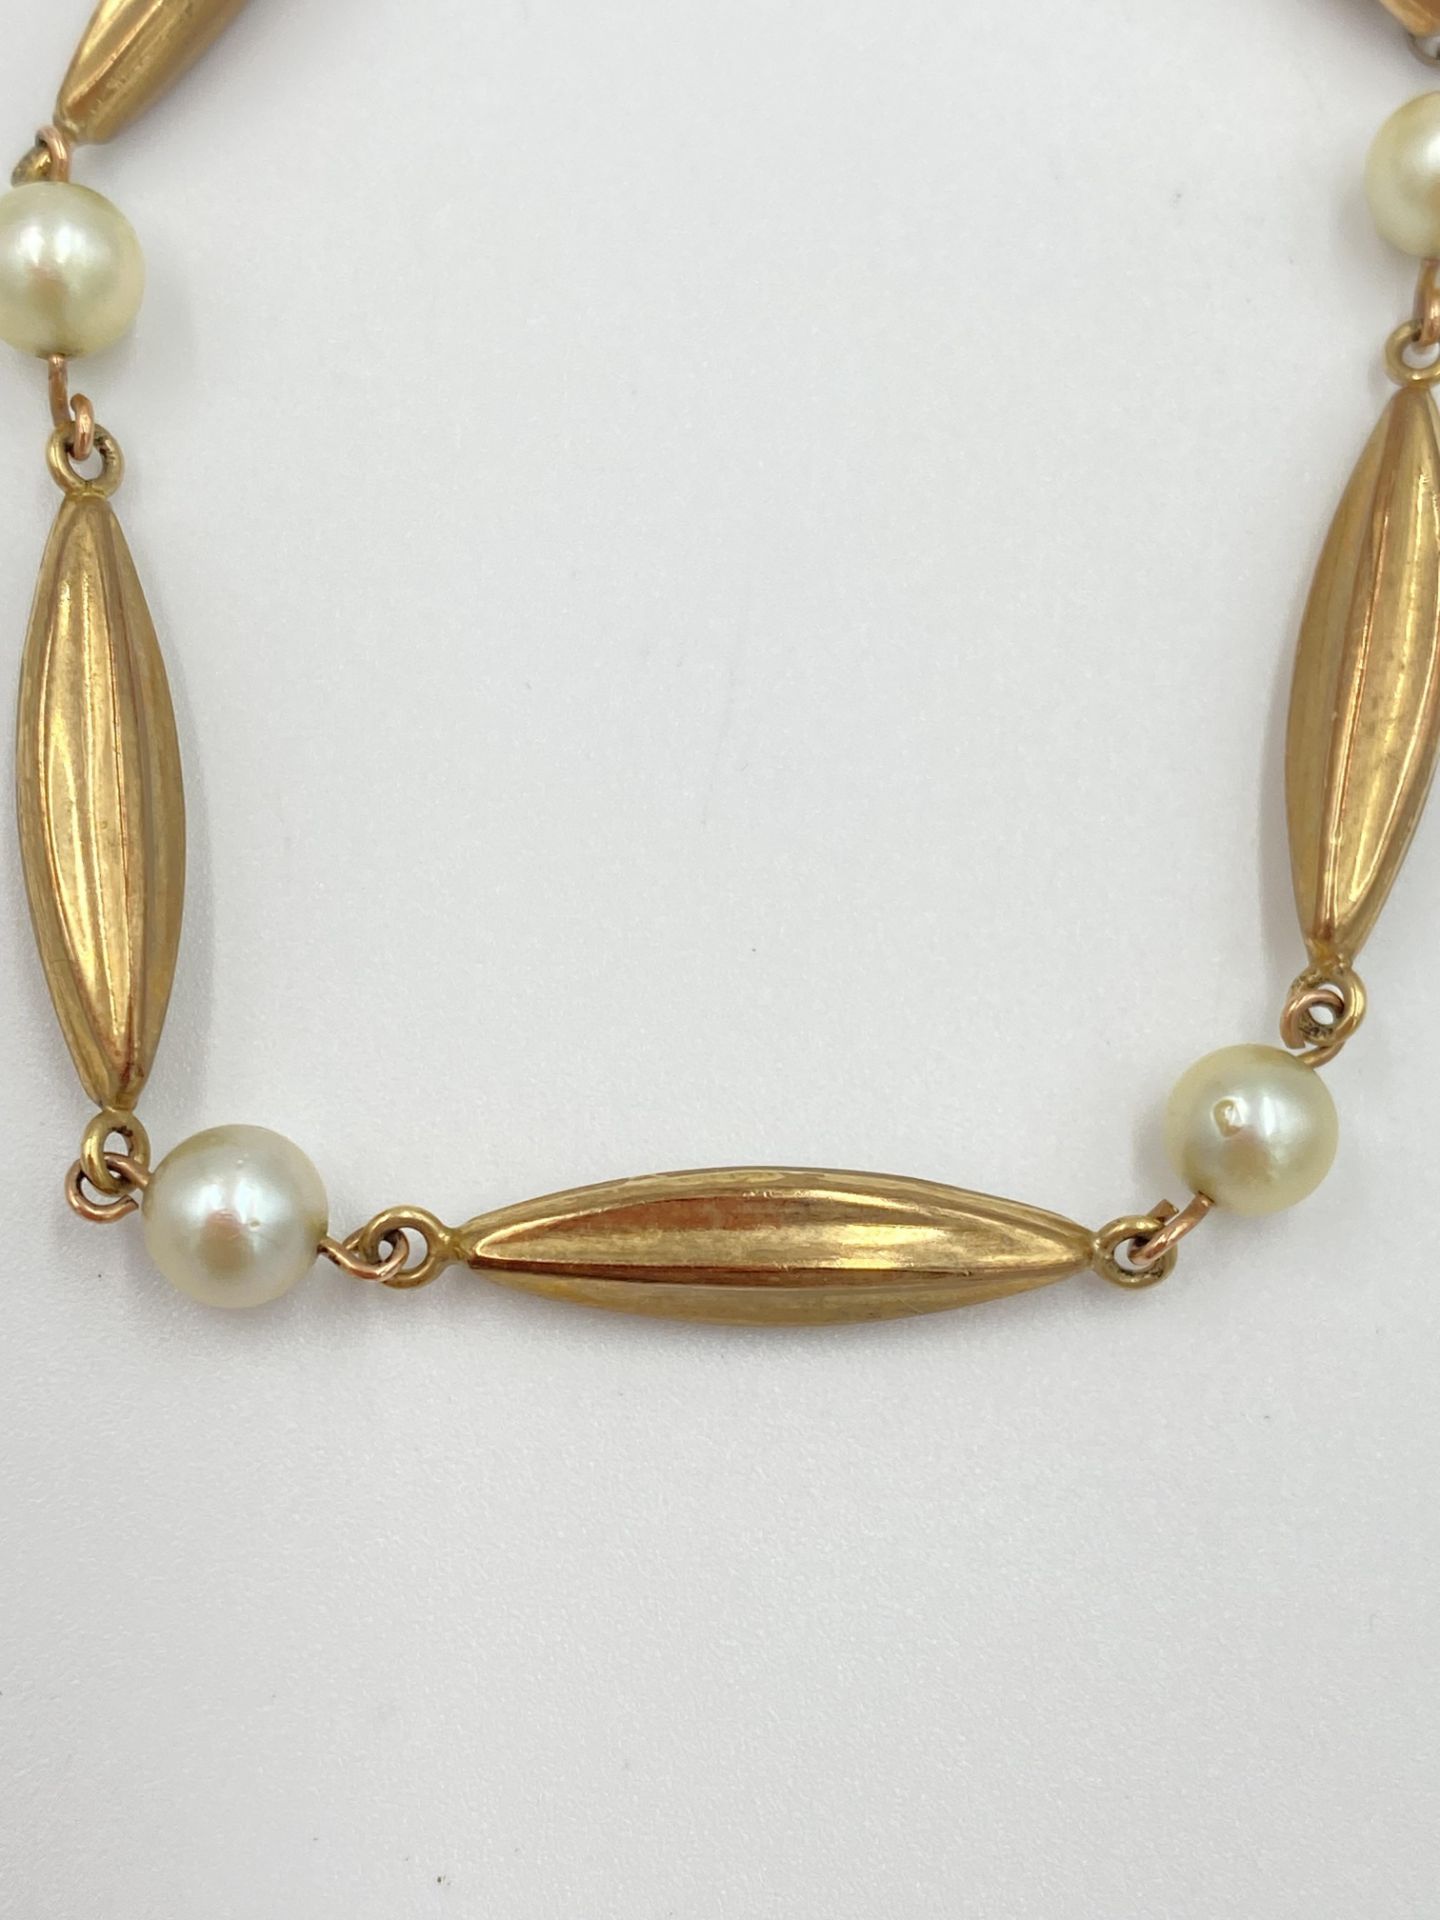 9ct gold and pearl bracelet - Image 2 of 4